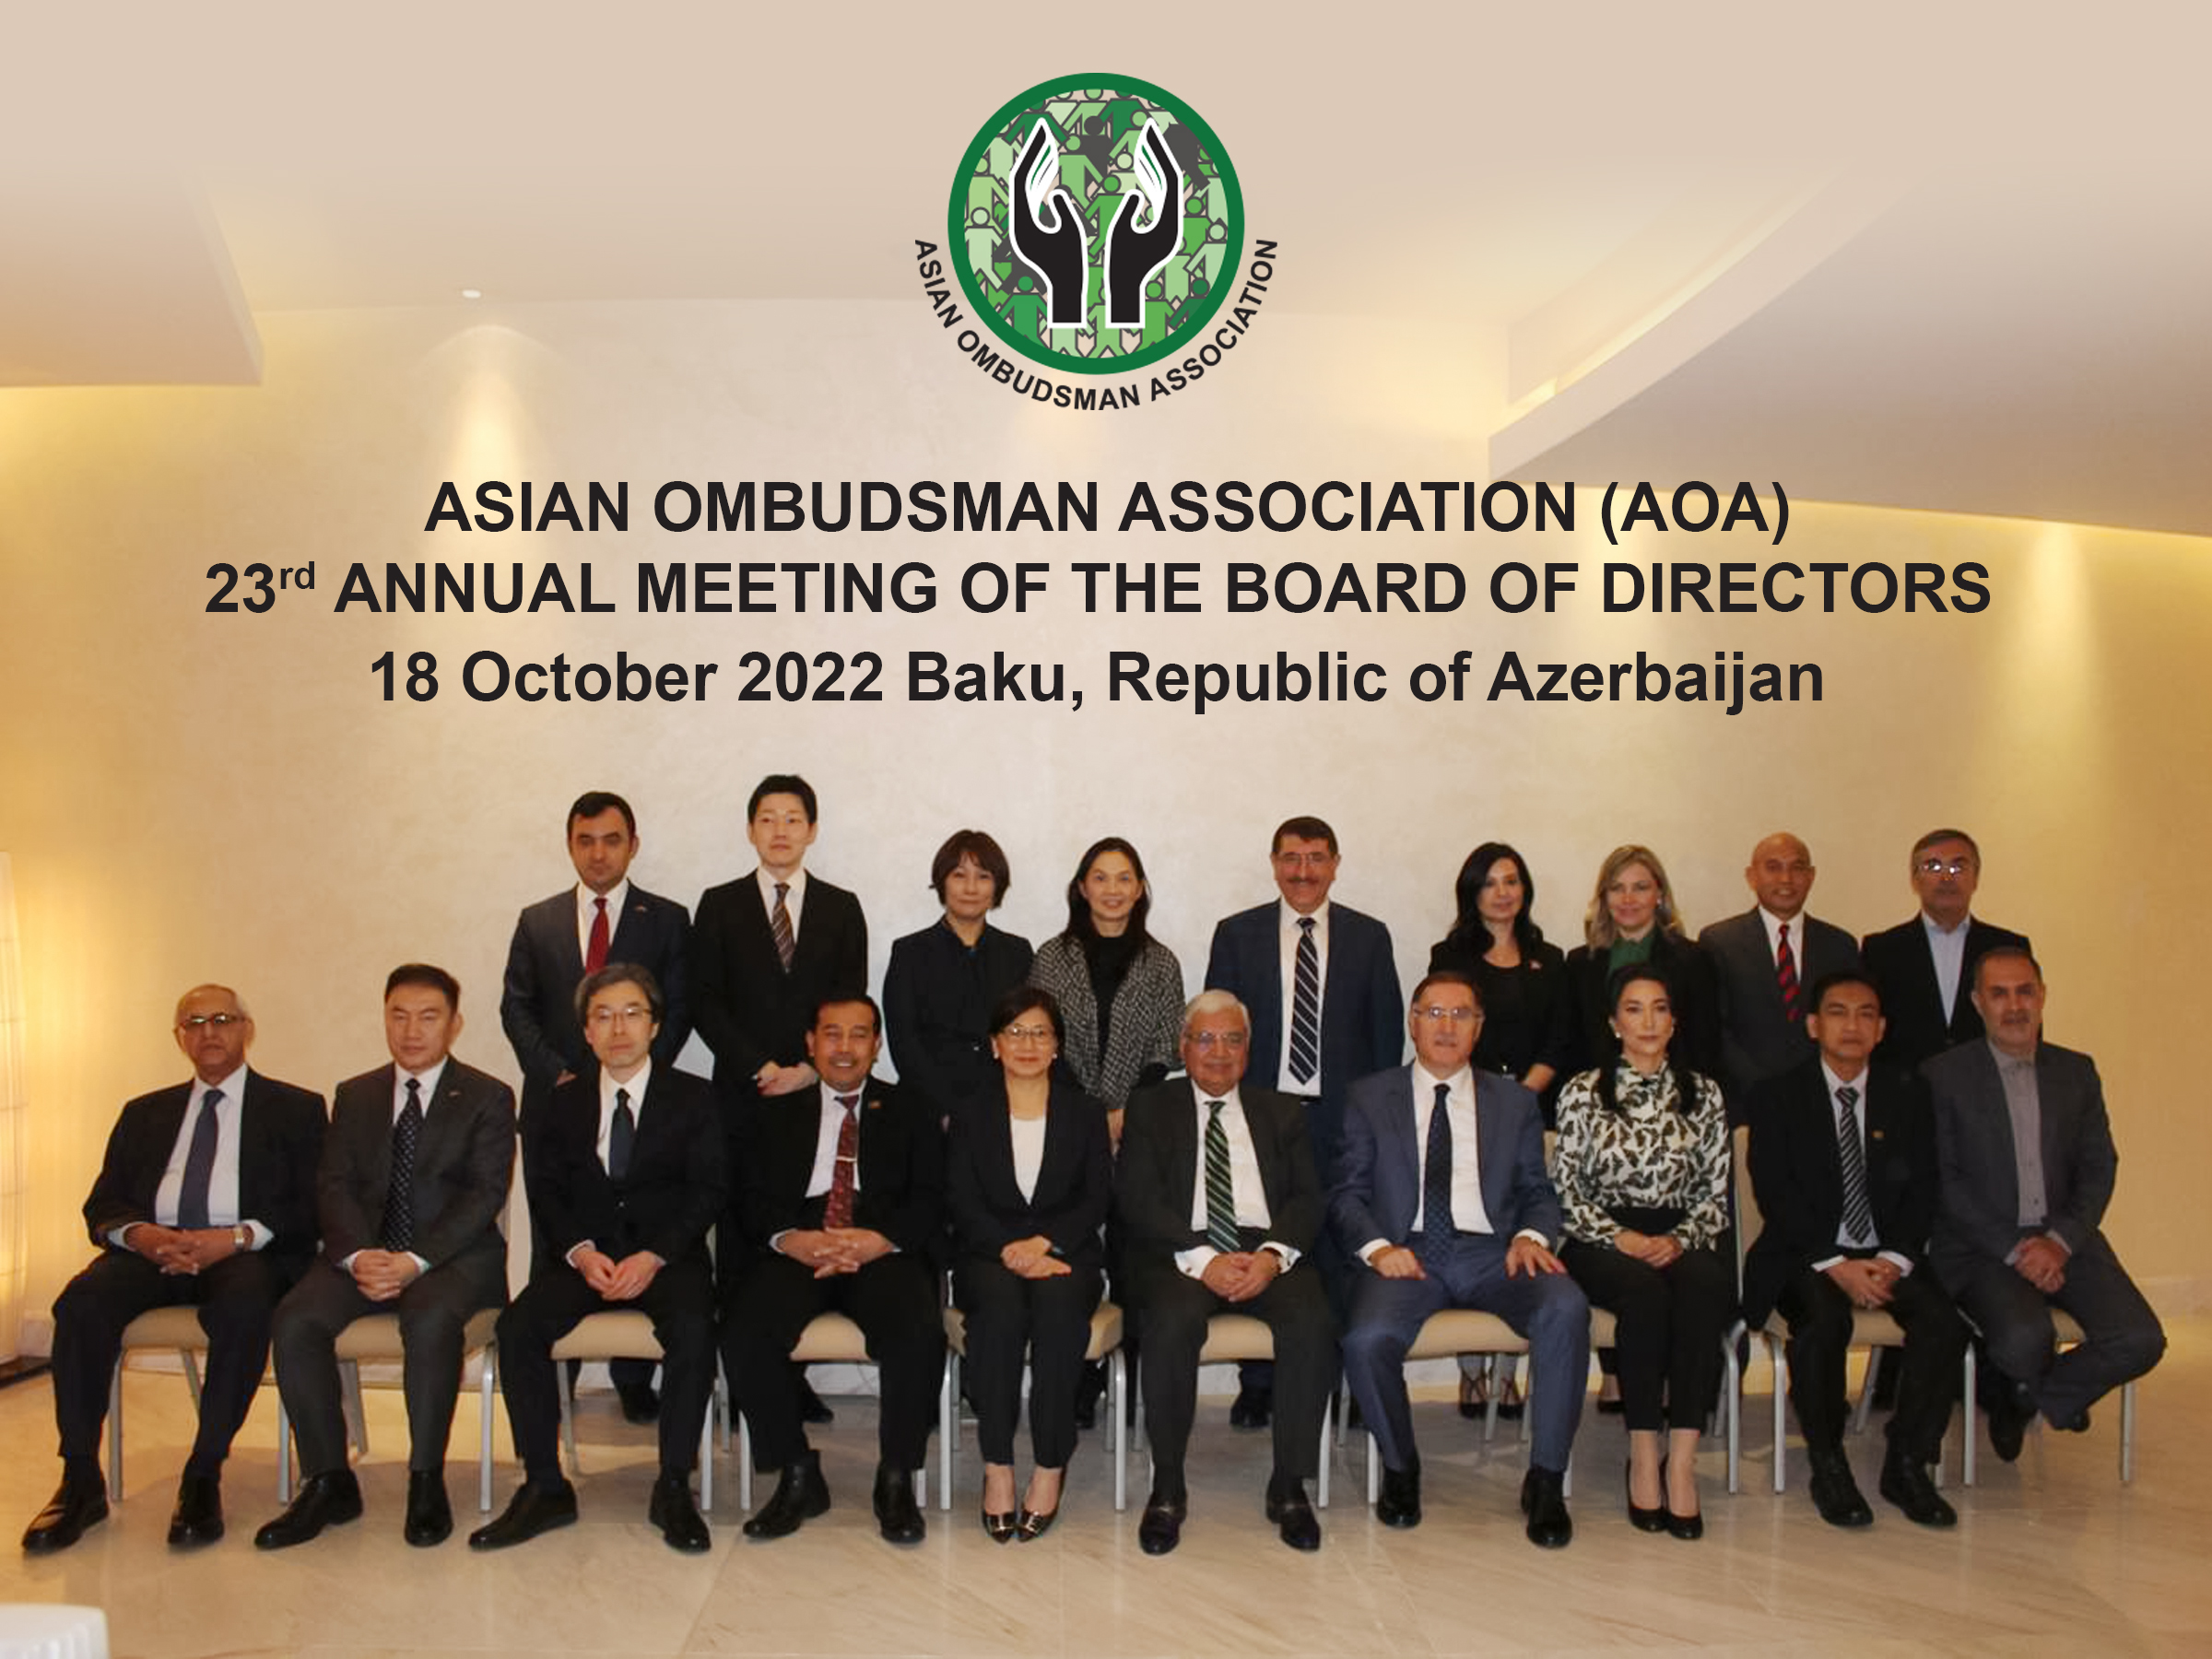 Family Photo of the AOA Members at the Event of the 23rd Board of Directors on 18 Oct 2022 in Baku, Azerbaijan